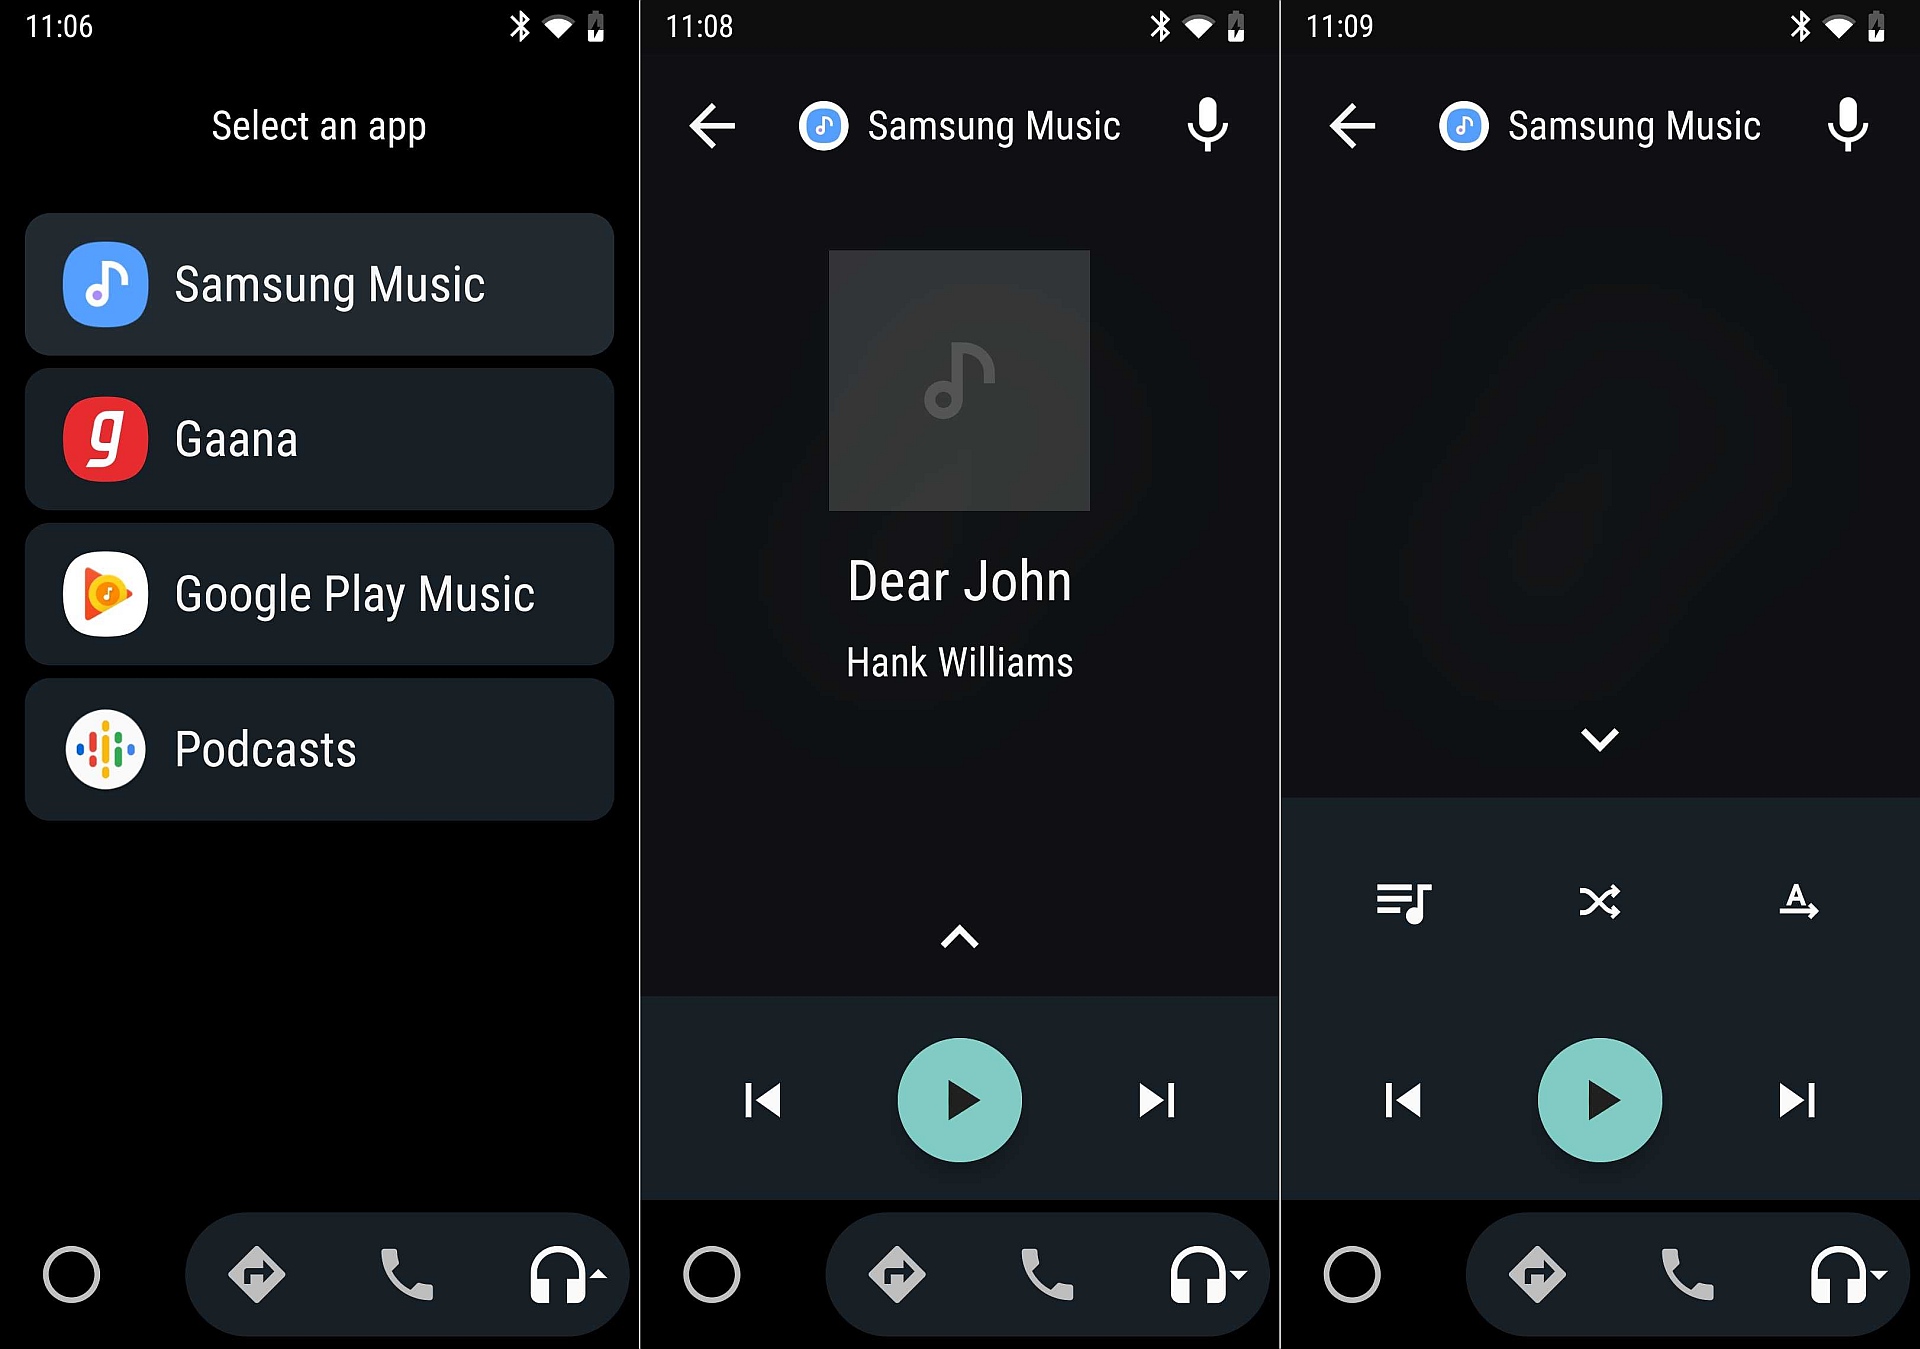 Samsung Music app updated with Android 10, Android Auto support SamMobile